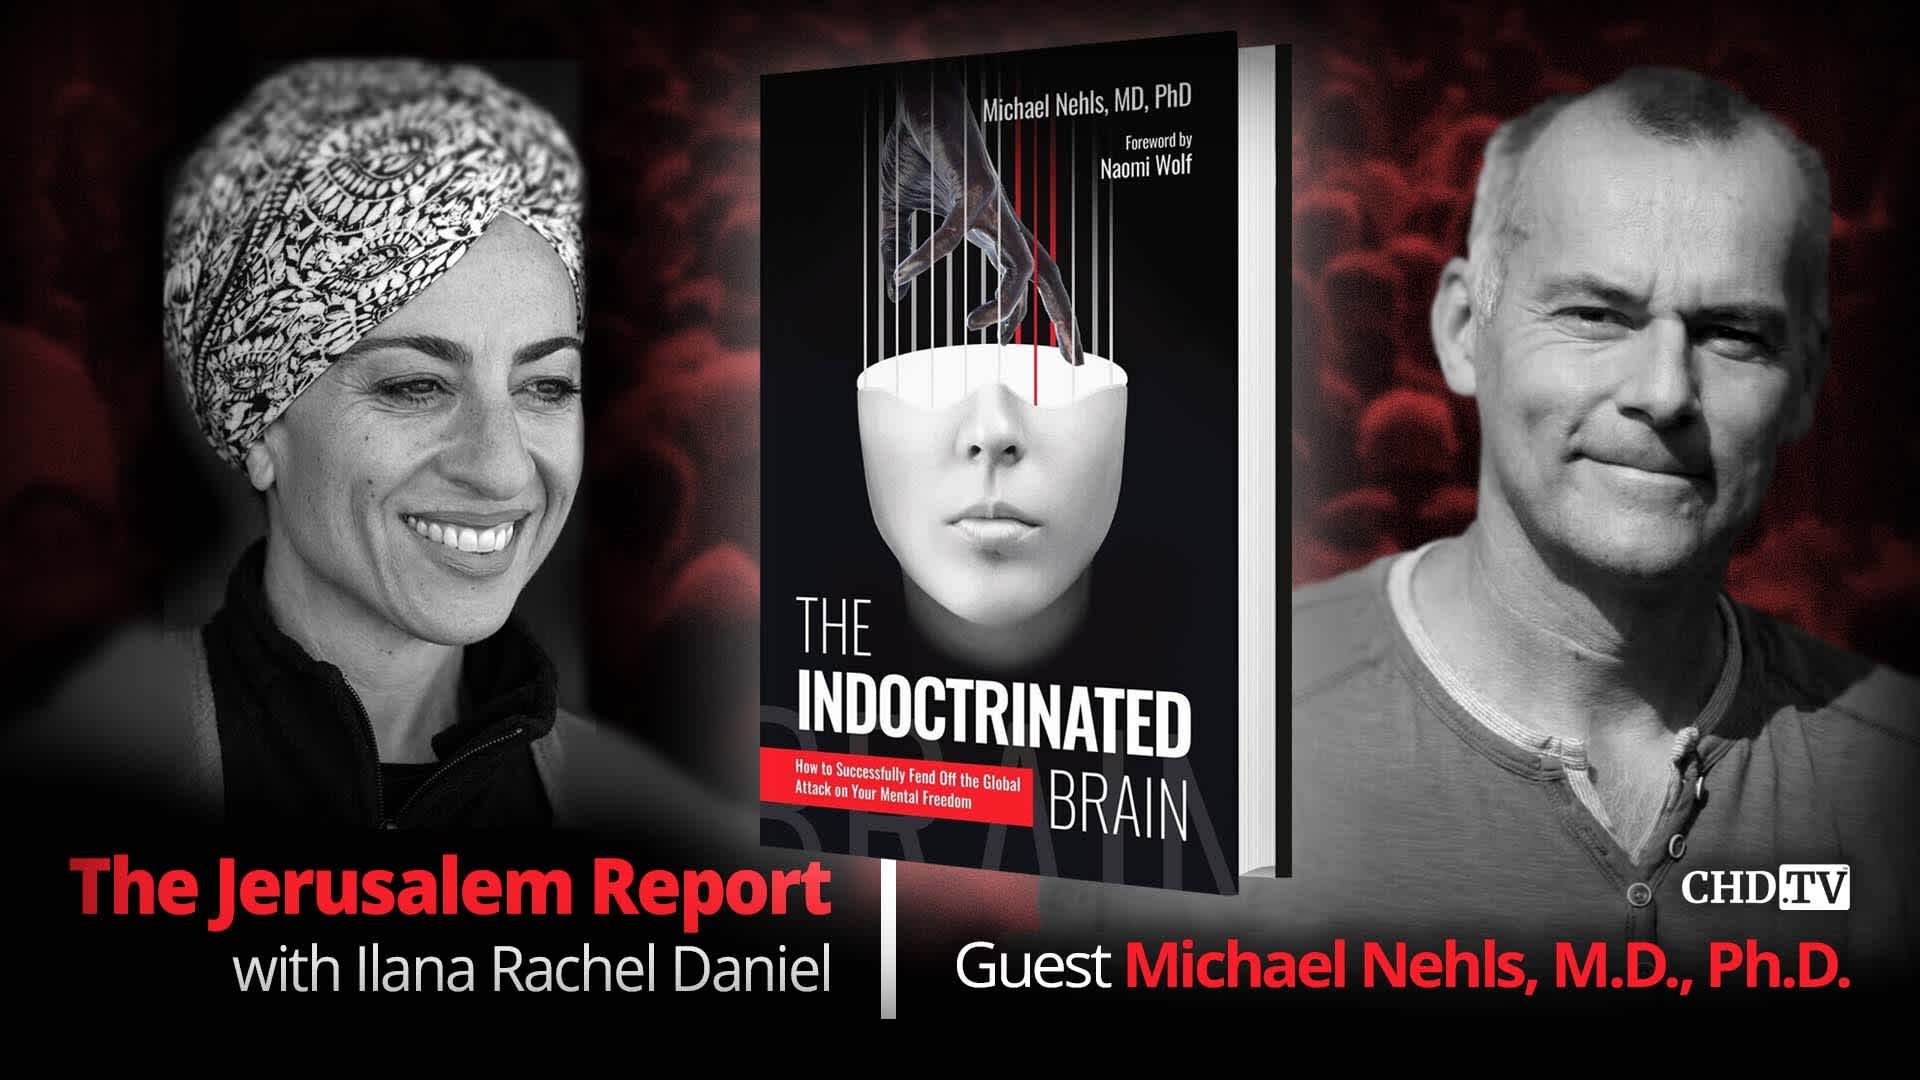 The Indoctrinated Brain With Michael Nehls, M.D., Ph.D. 